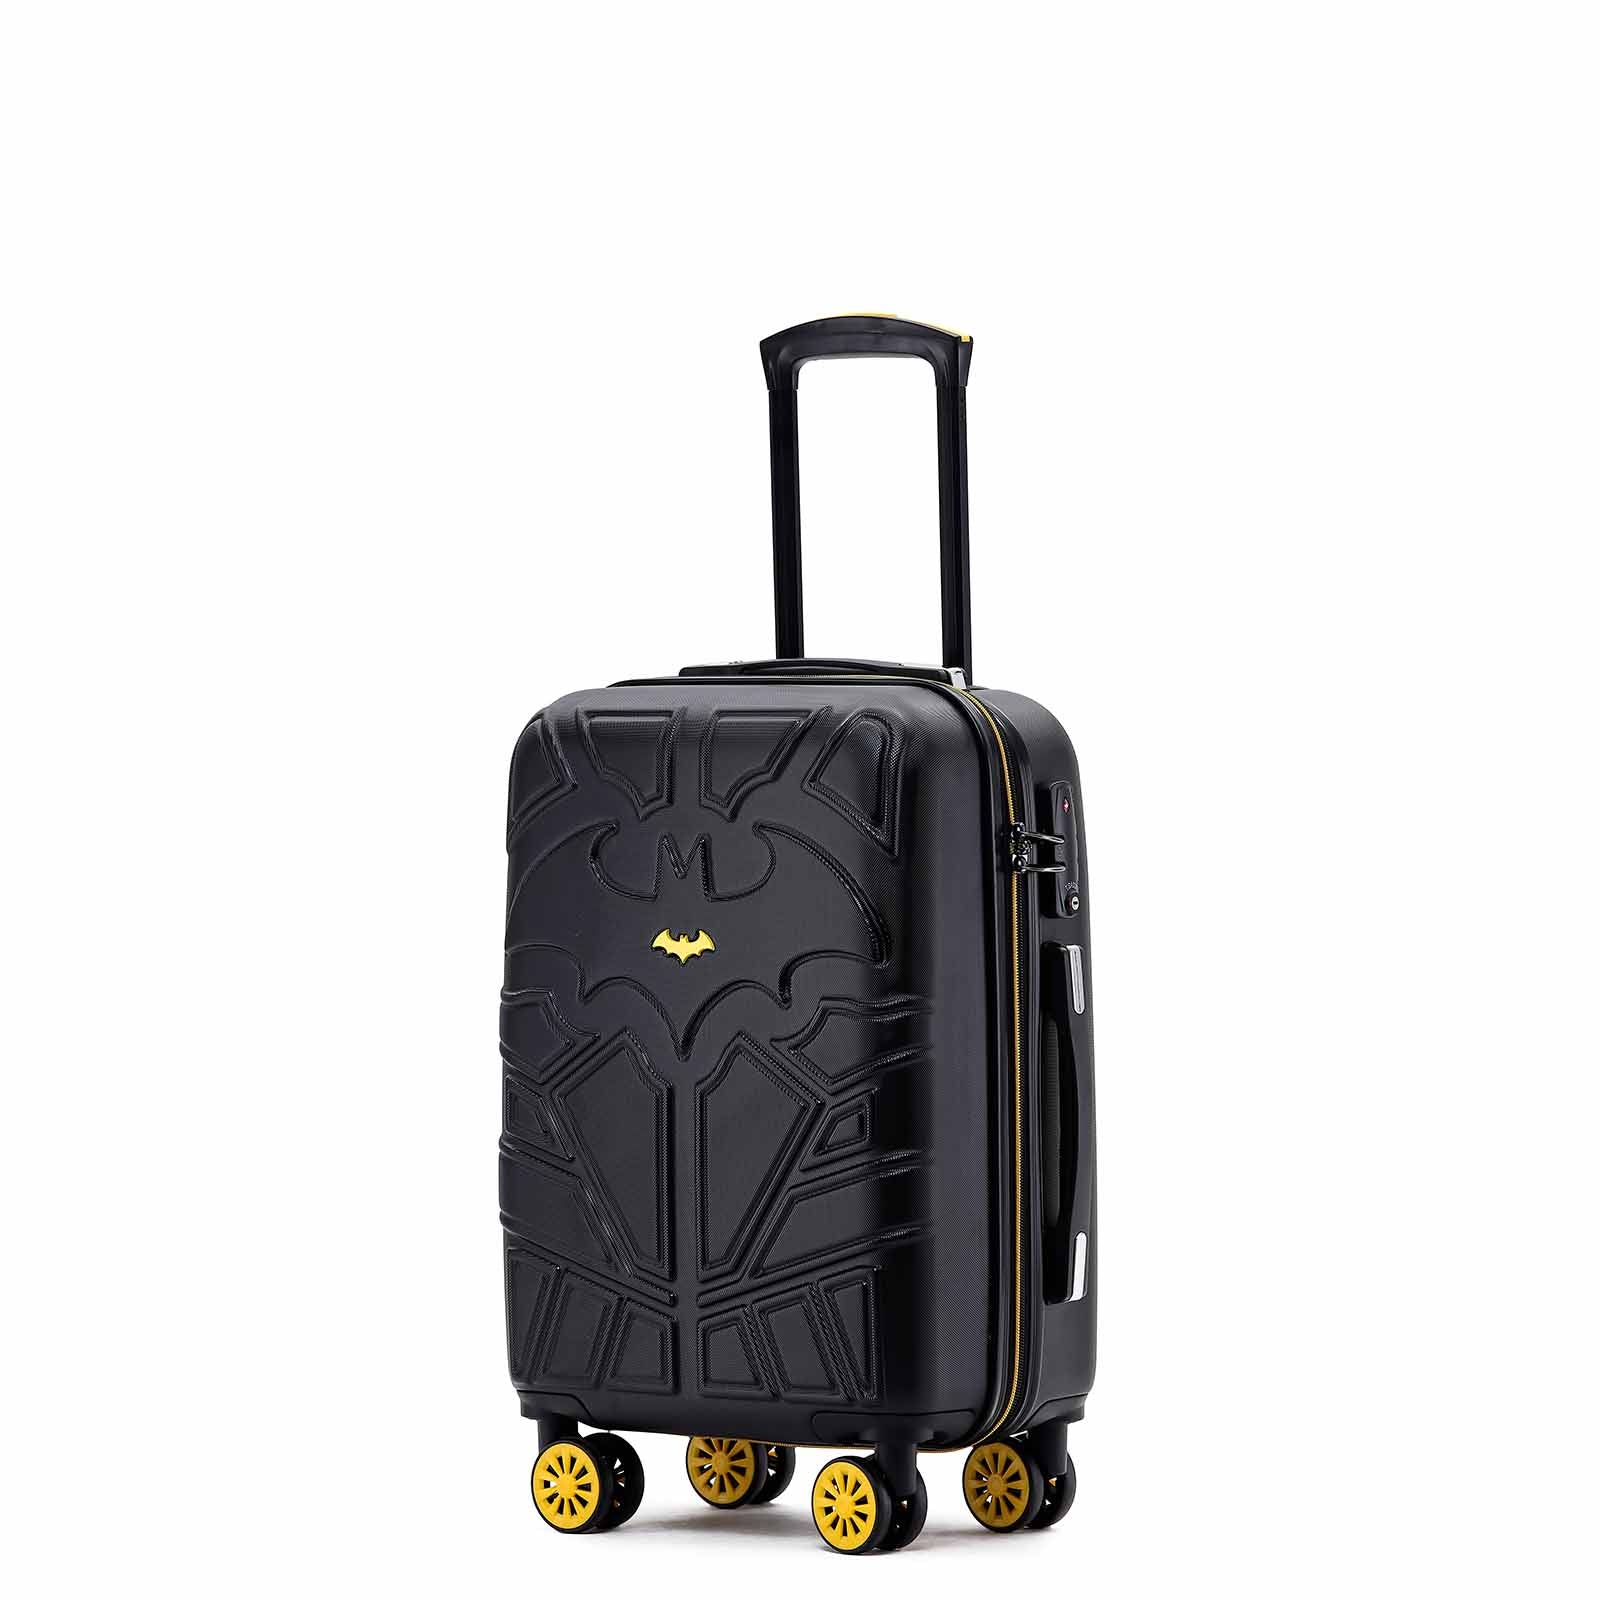 Warner Brothers Batman 28inch Large Suitcase